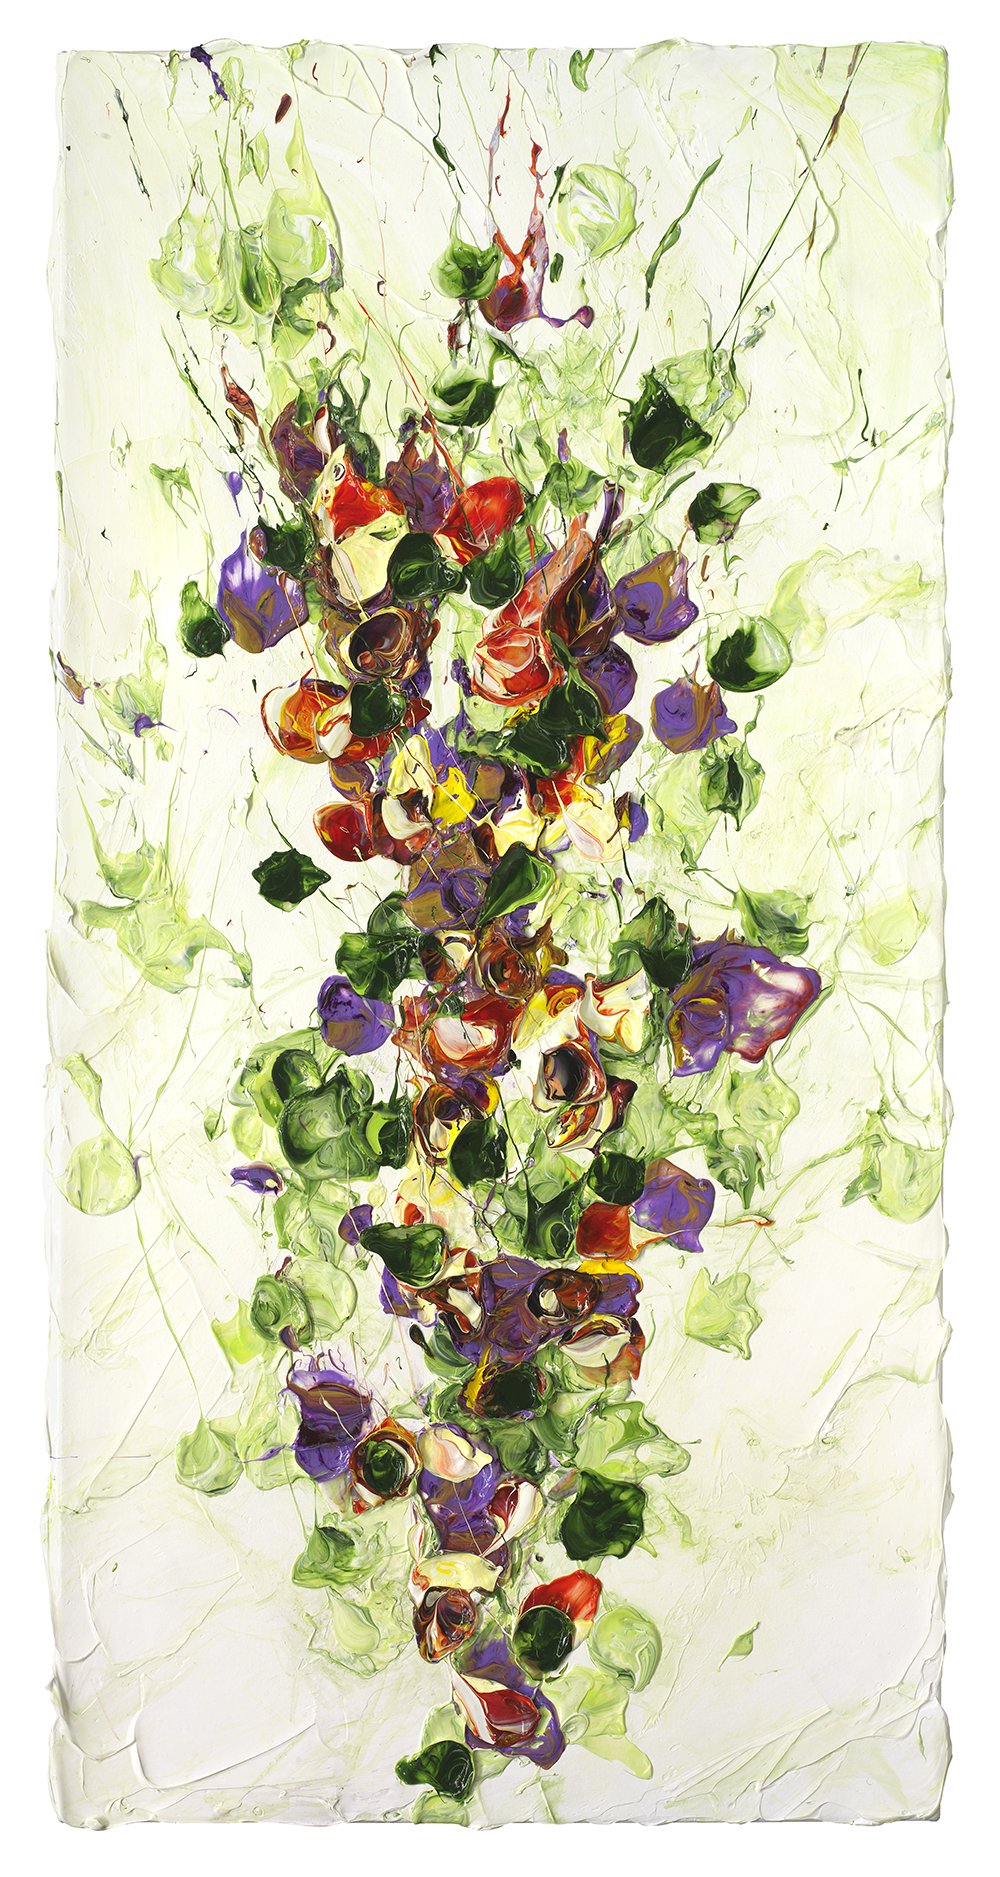 Nature's Bouquet 66 | Acrylic on linen | 24 x 48 in.